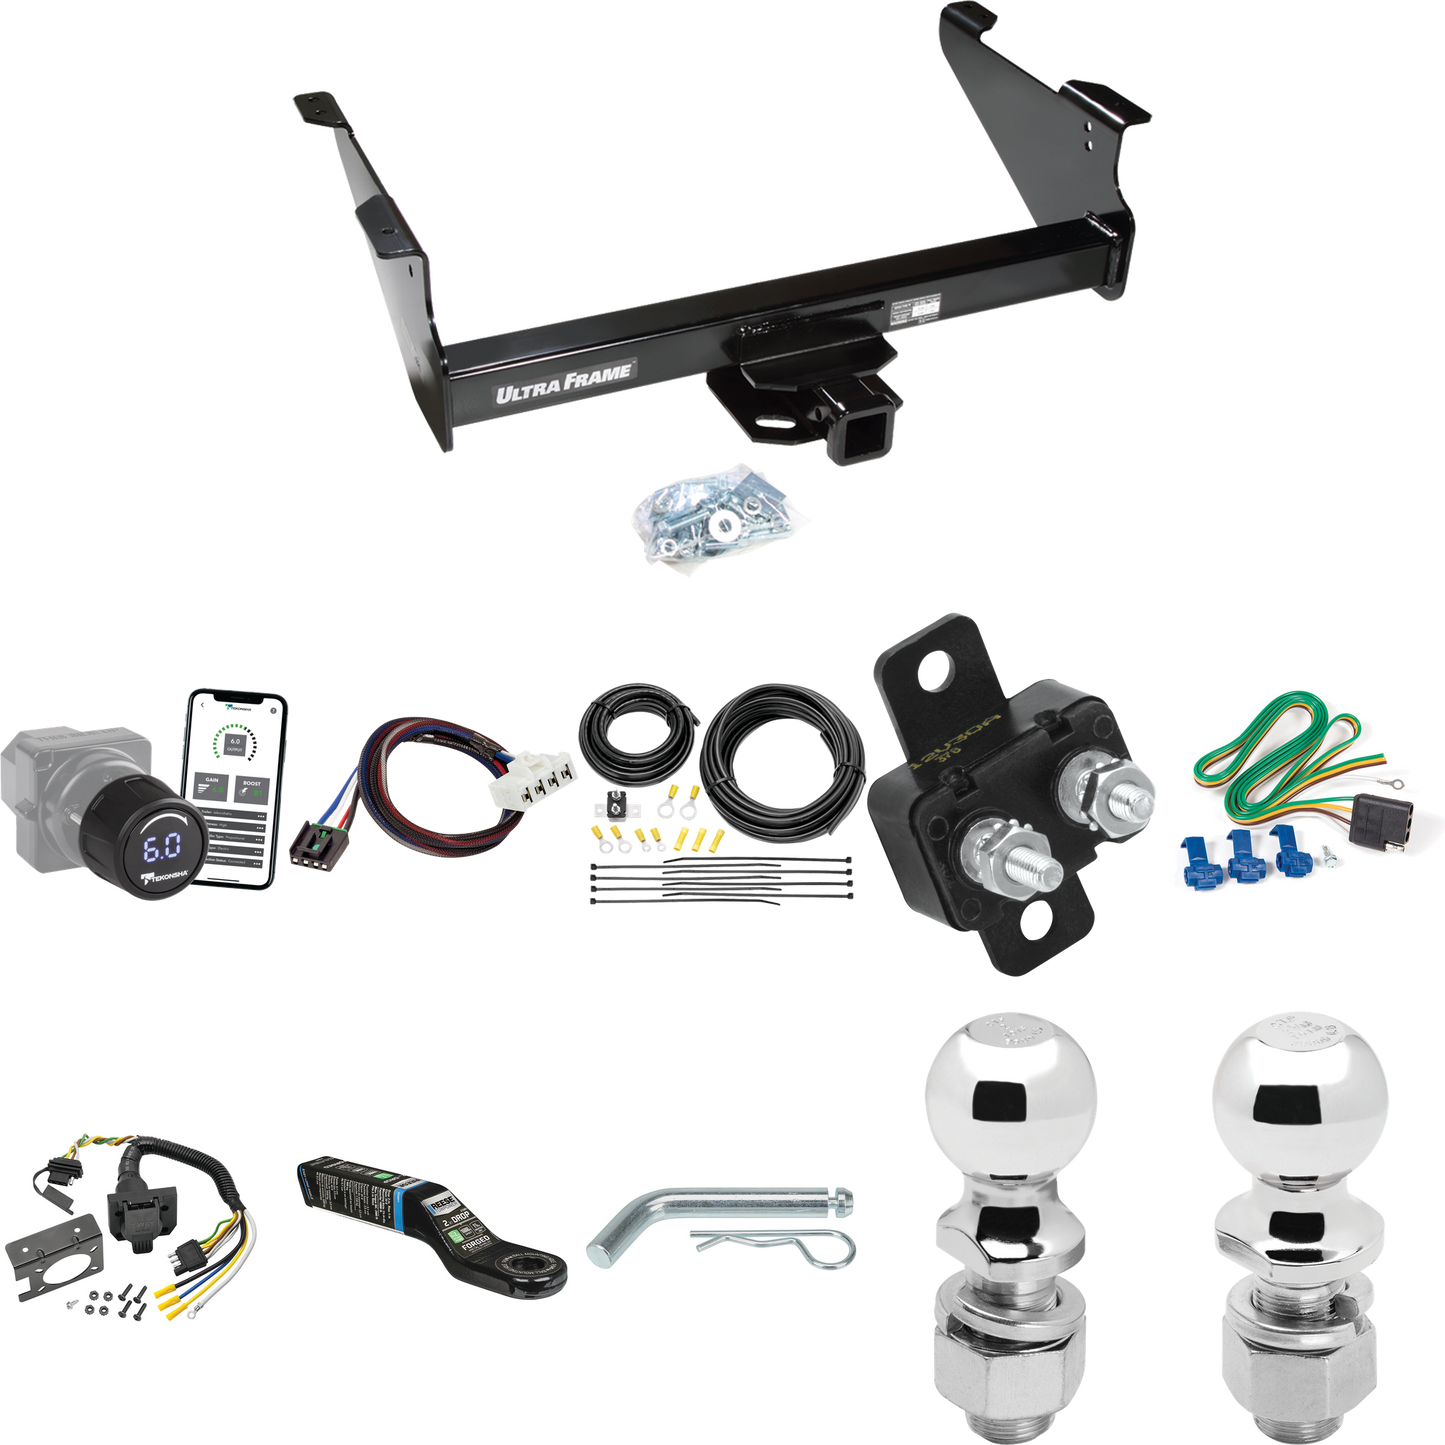 Fits 2003-2003 Dodge Ram 1500 Trailer Hitch Tow PKG w/ Tekonsha Prodigy iD Bluetooth Wireless Brake Control + Plug & Play BC Adapter + 7-Way RV Wiring + 2" & 2-5/16" Ball & Drop Mount (For (Built After 11/2002) Models) By Draw-Tite